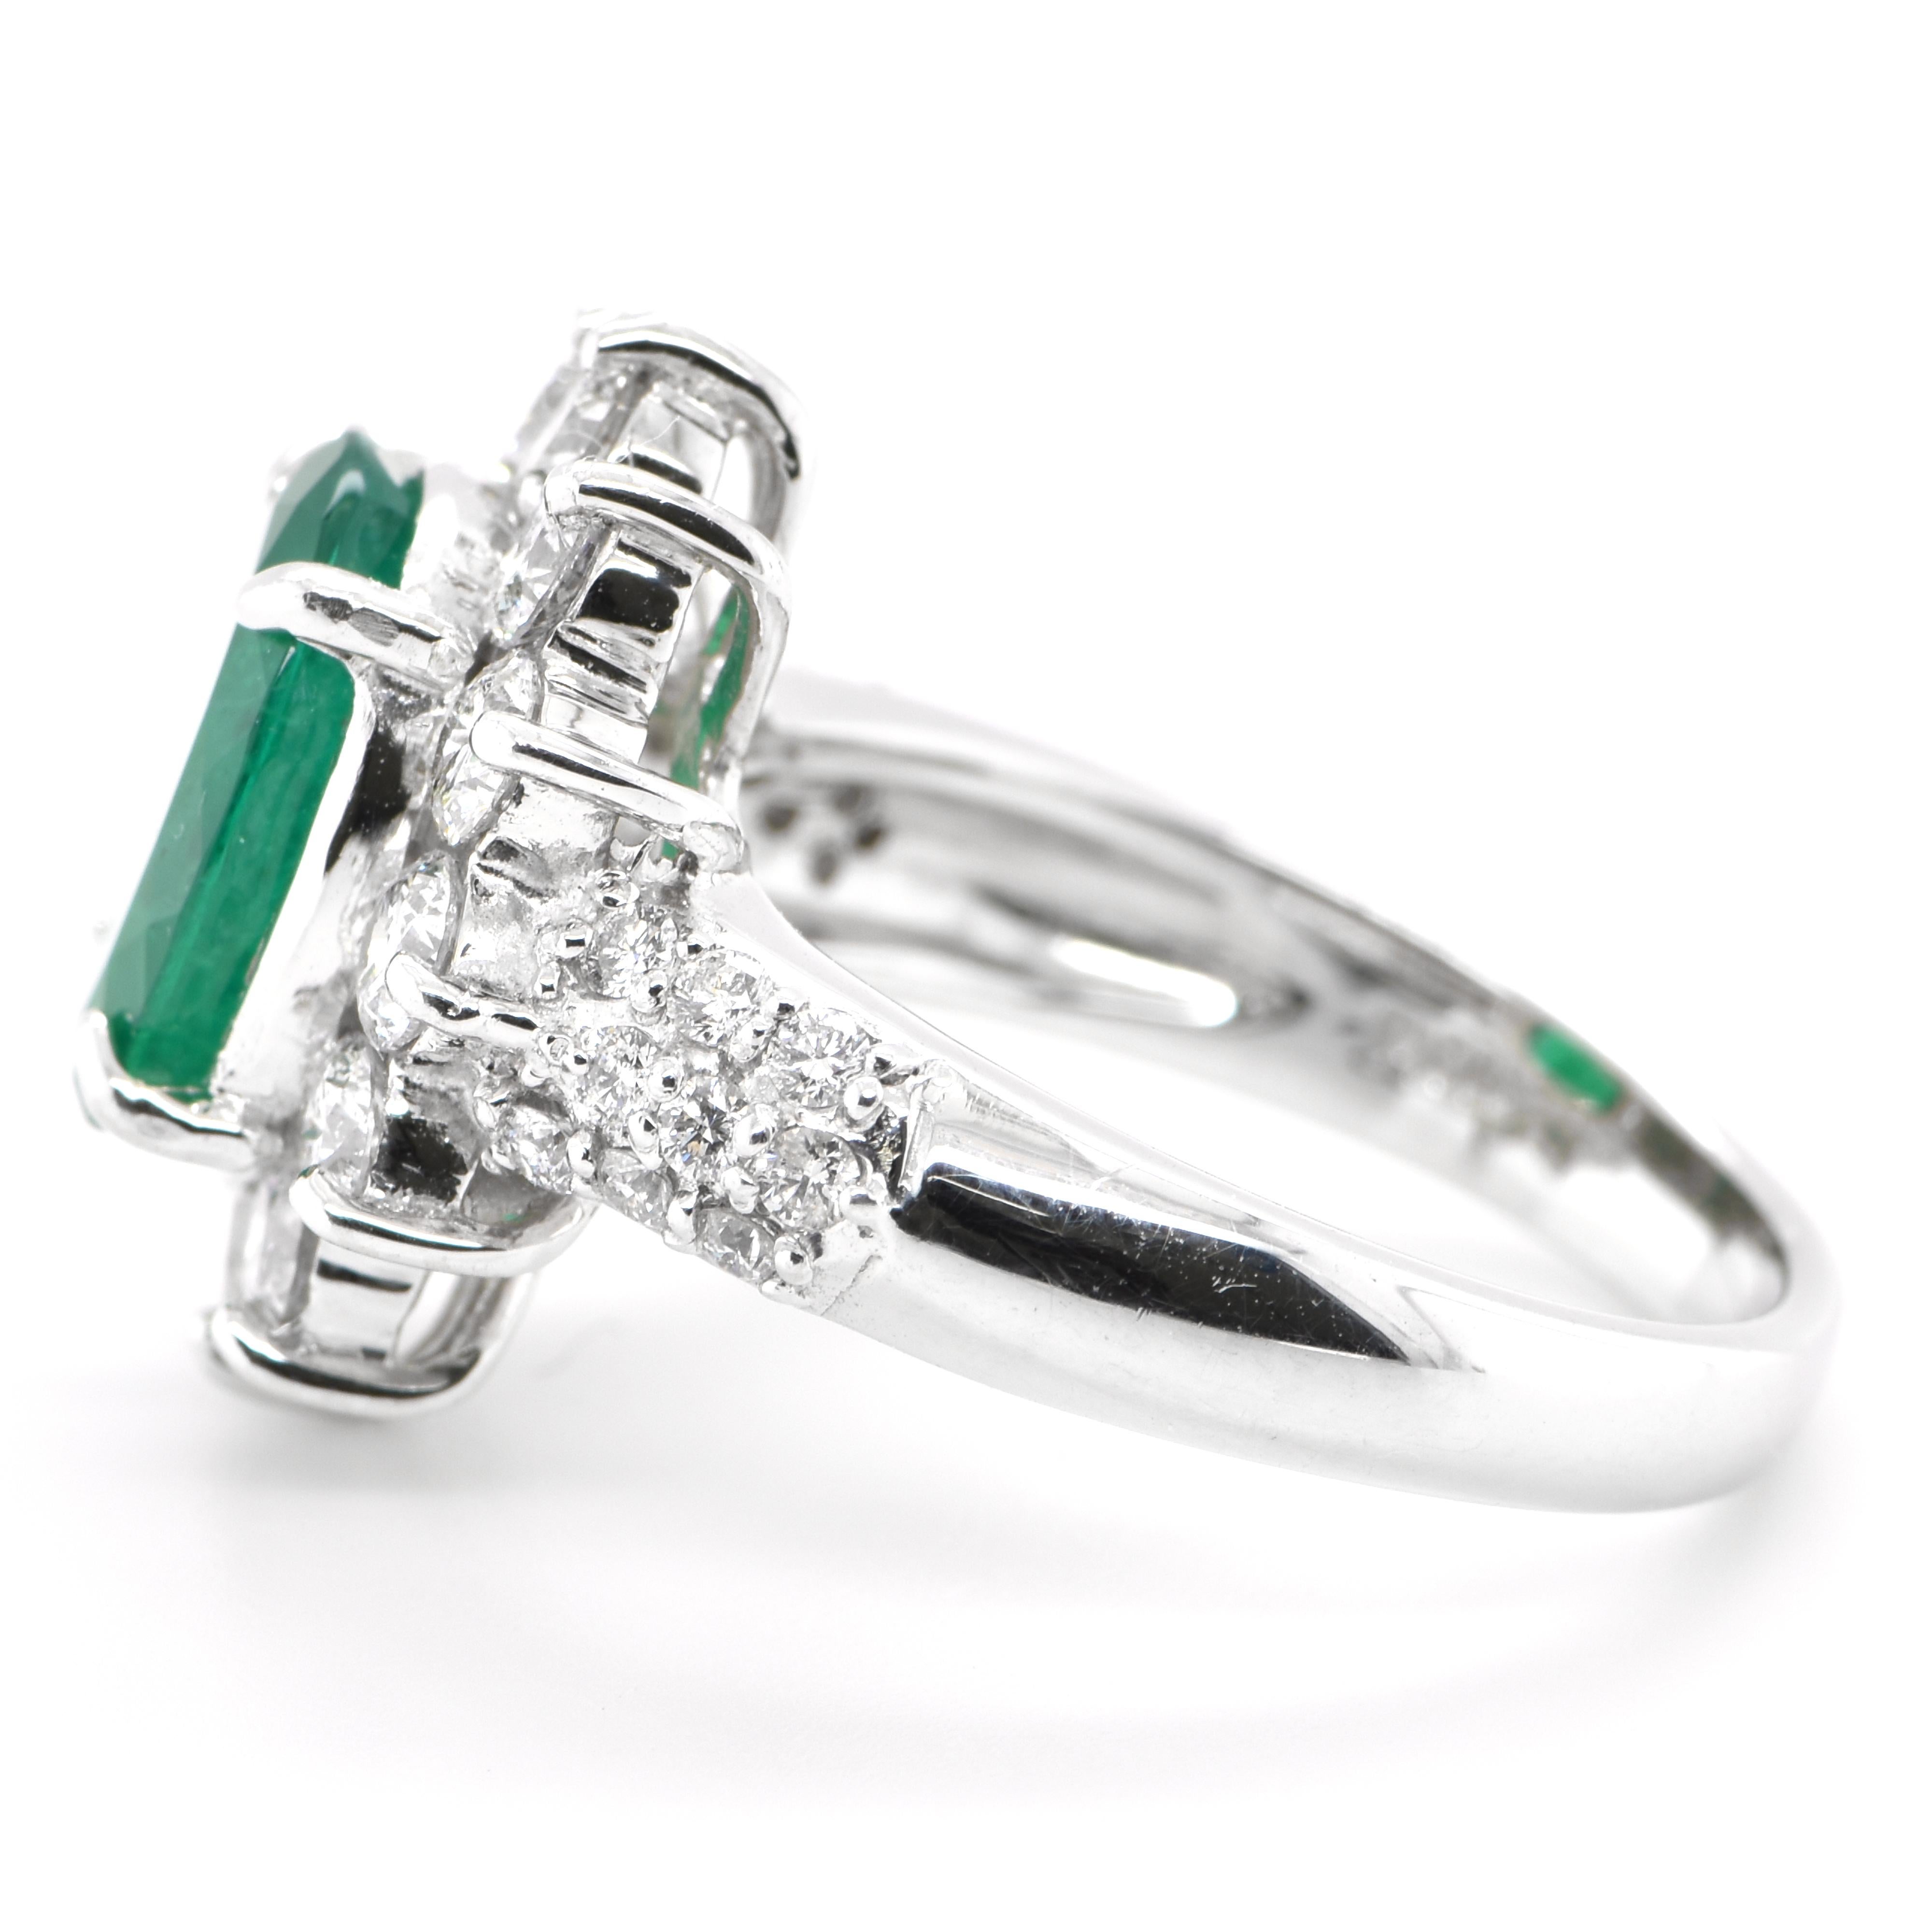 Oval Cut 2.61 Carat Natural Oval-Cut Emerald and Diamond Halo Ring Set in Platinum For Sale